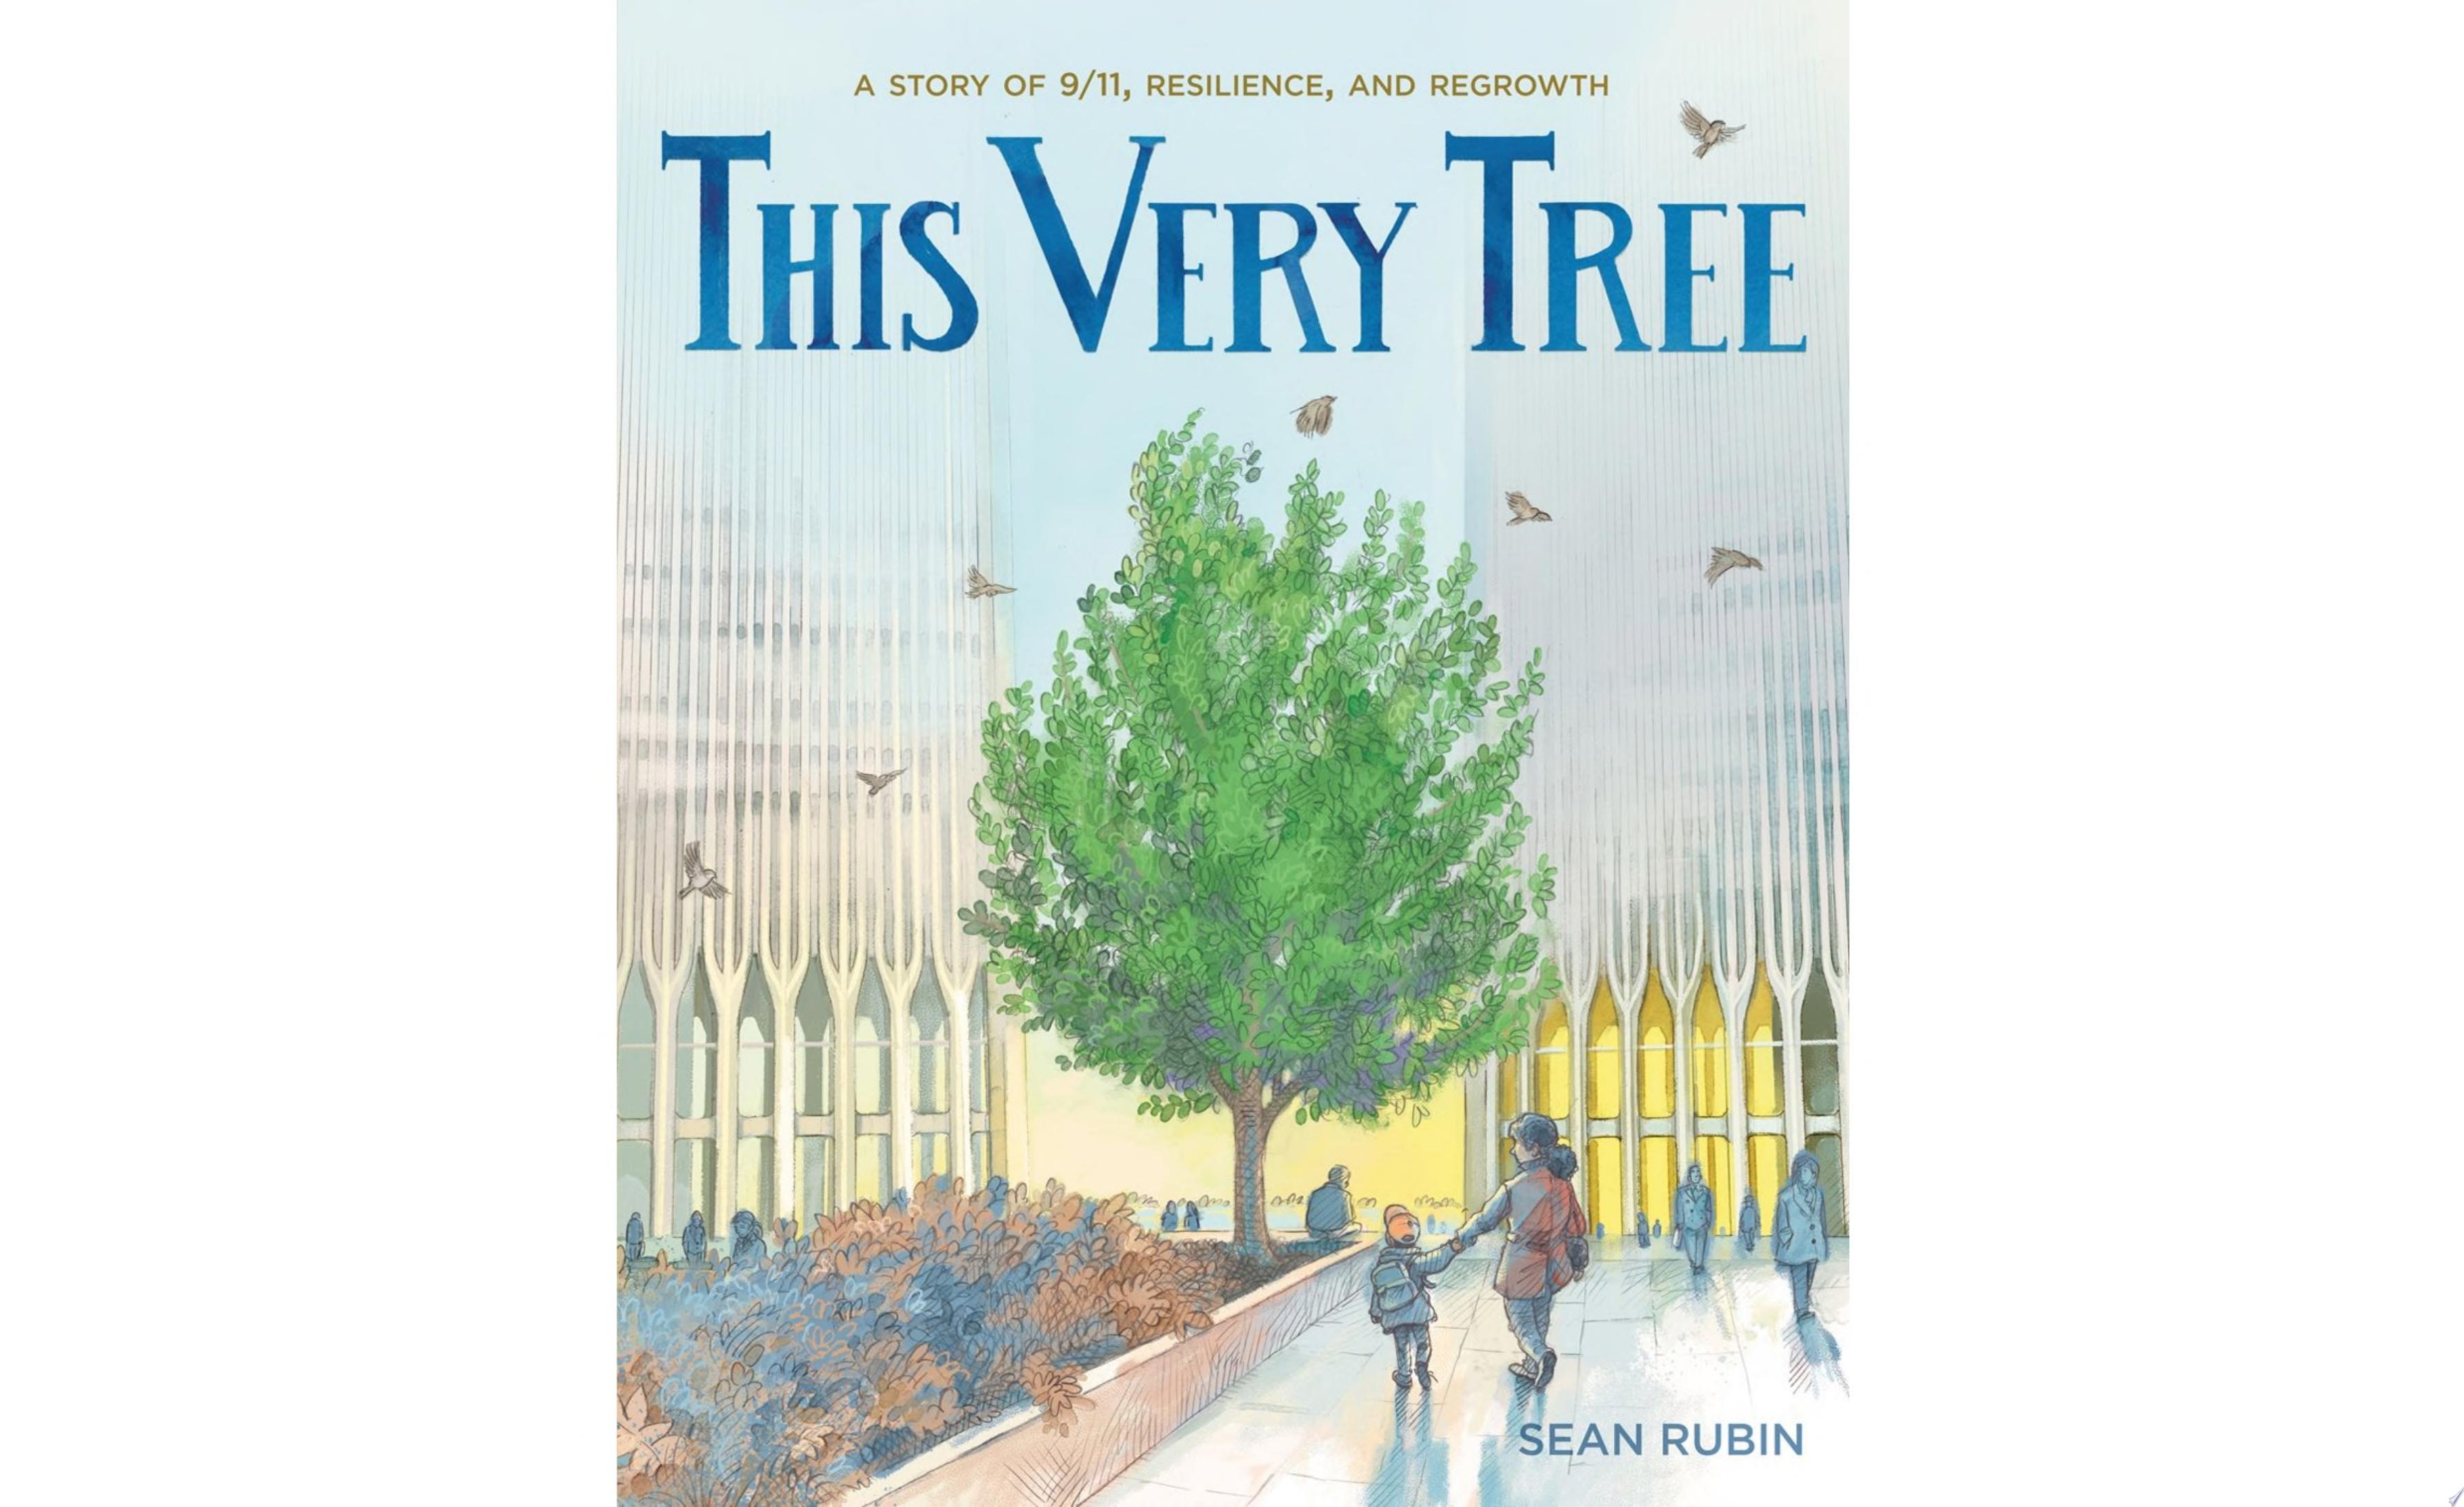 Image for "This Very Tree"